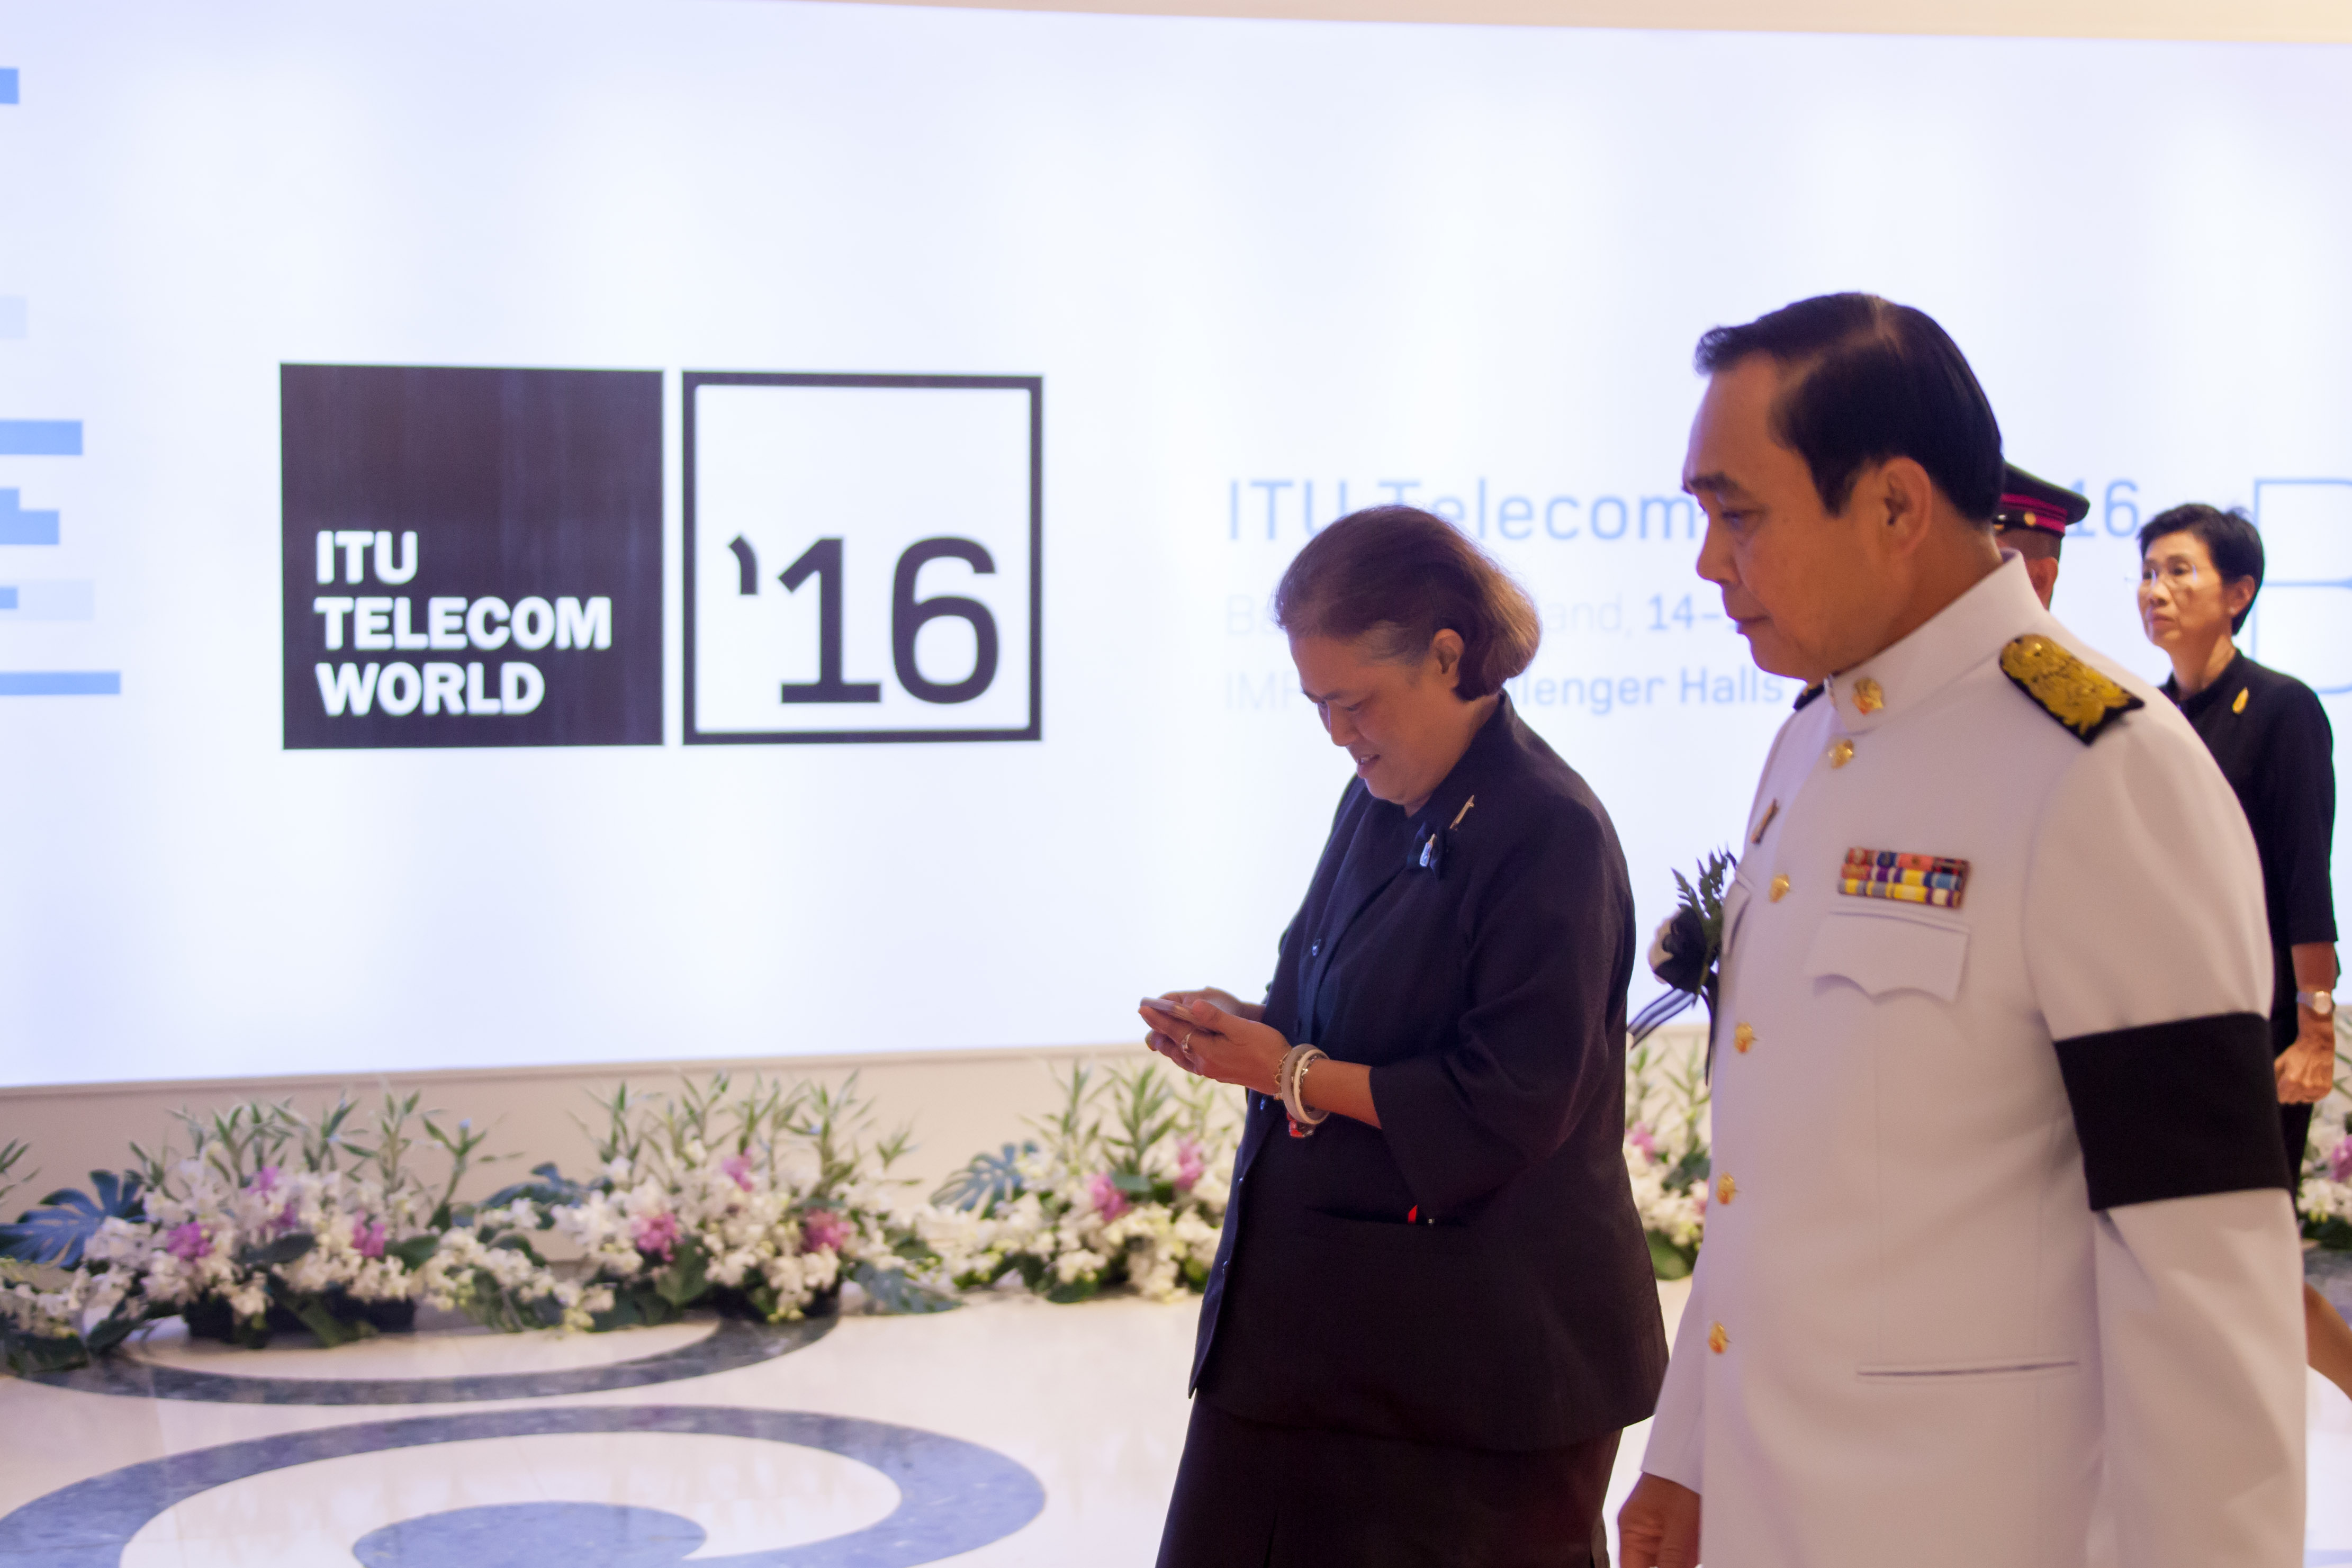 Prime Minister Prayut Chan-o-cha of Thailand (photo credit: ITU Pictures/flickr)